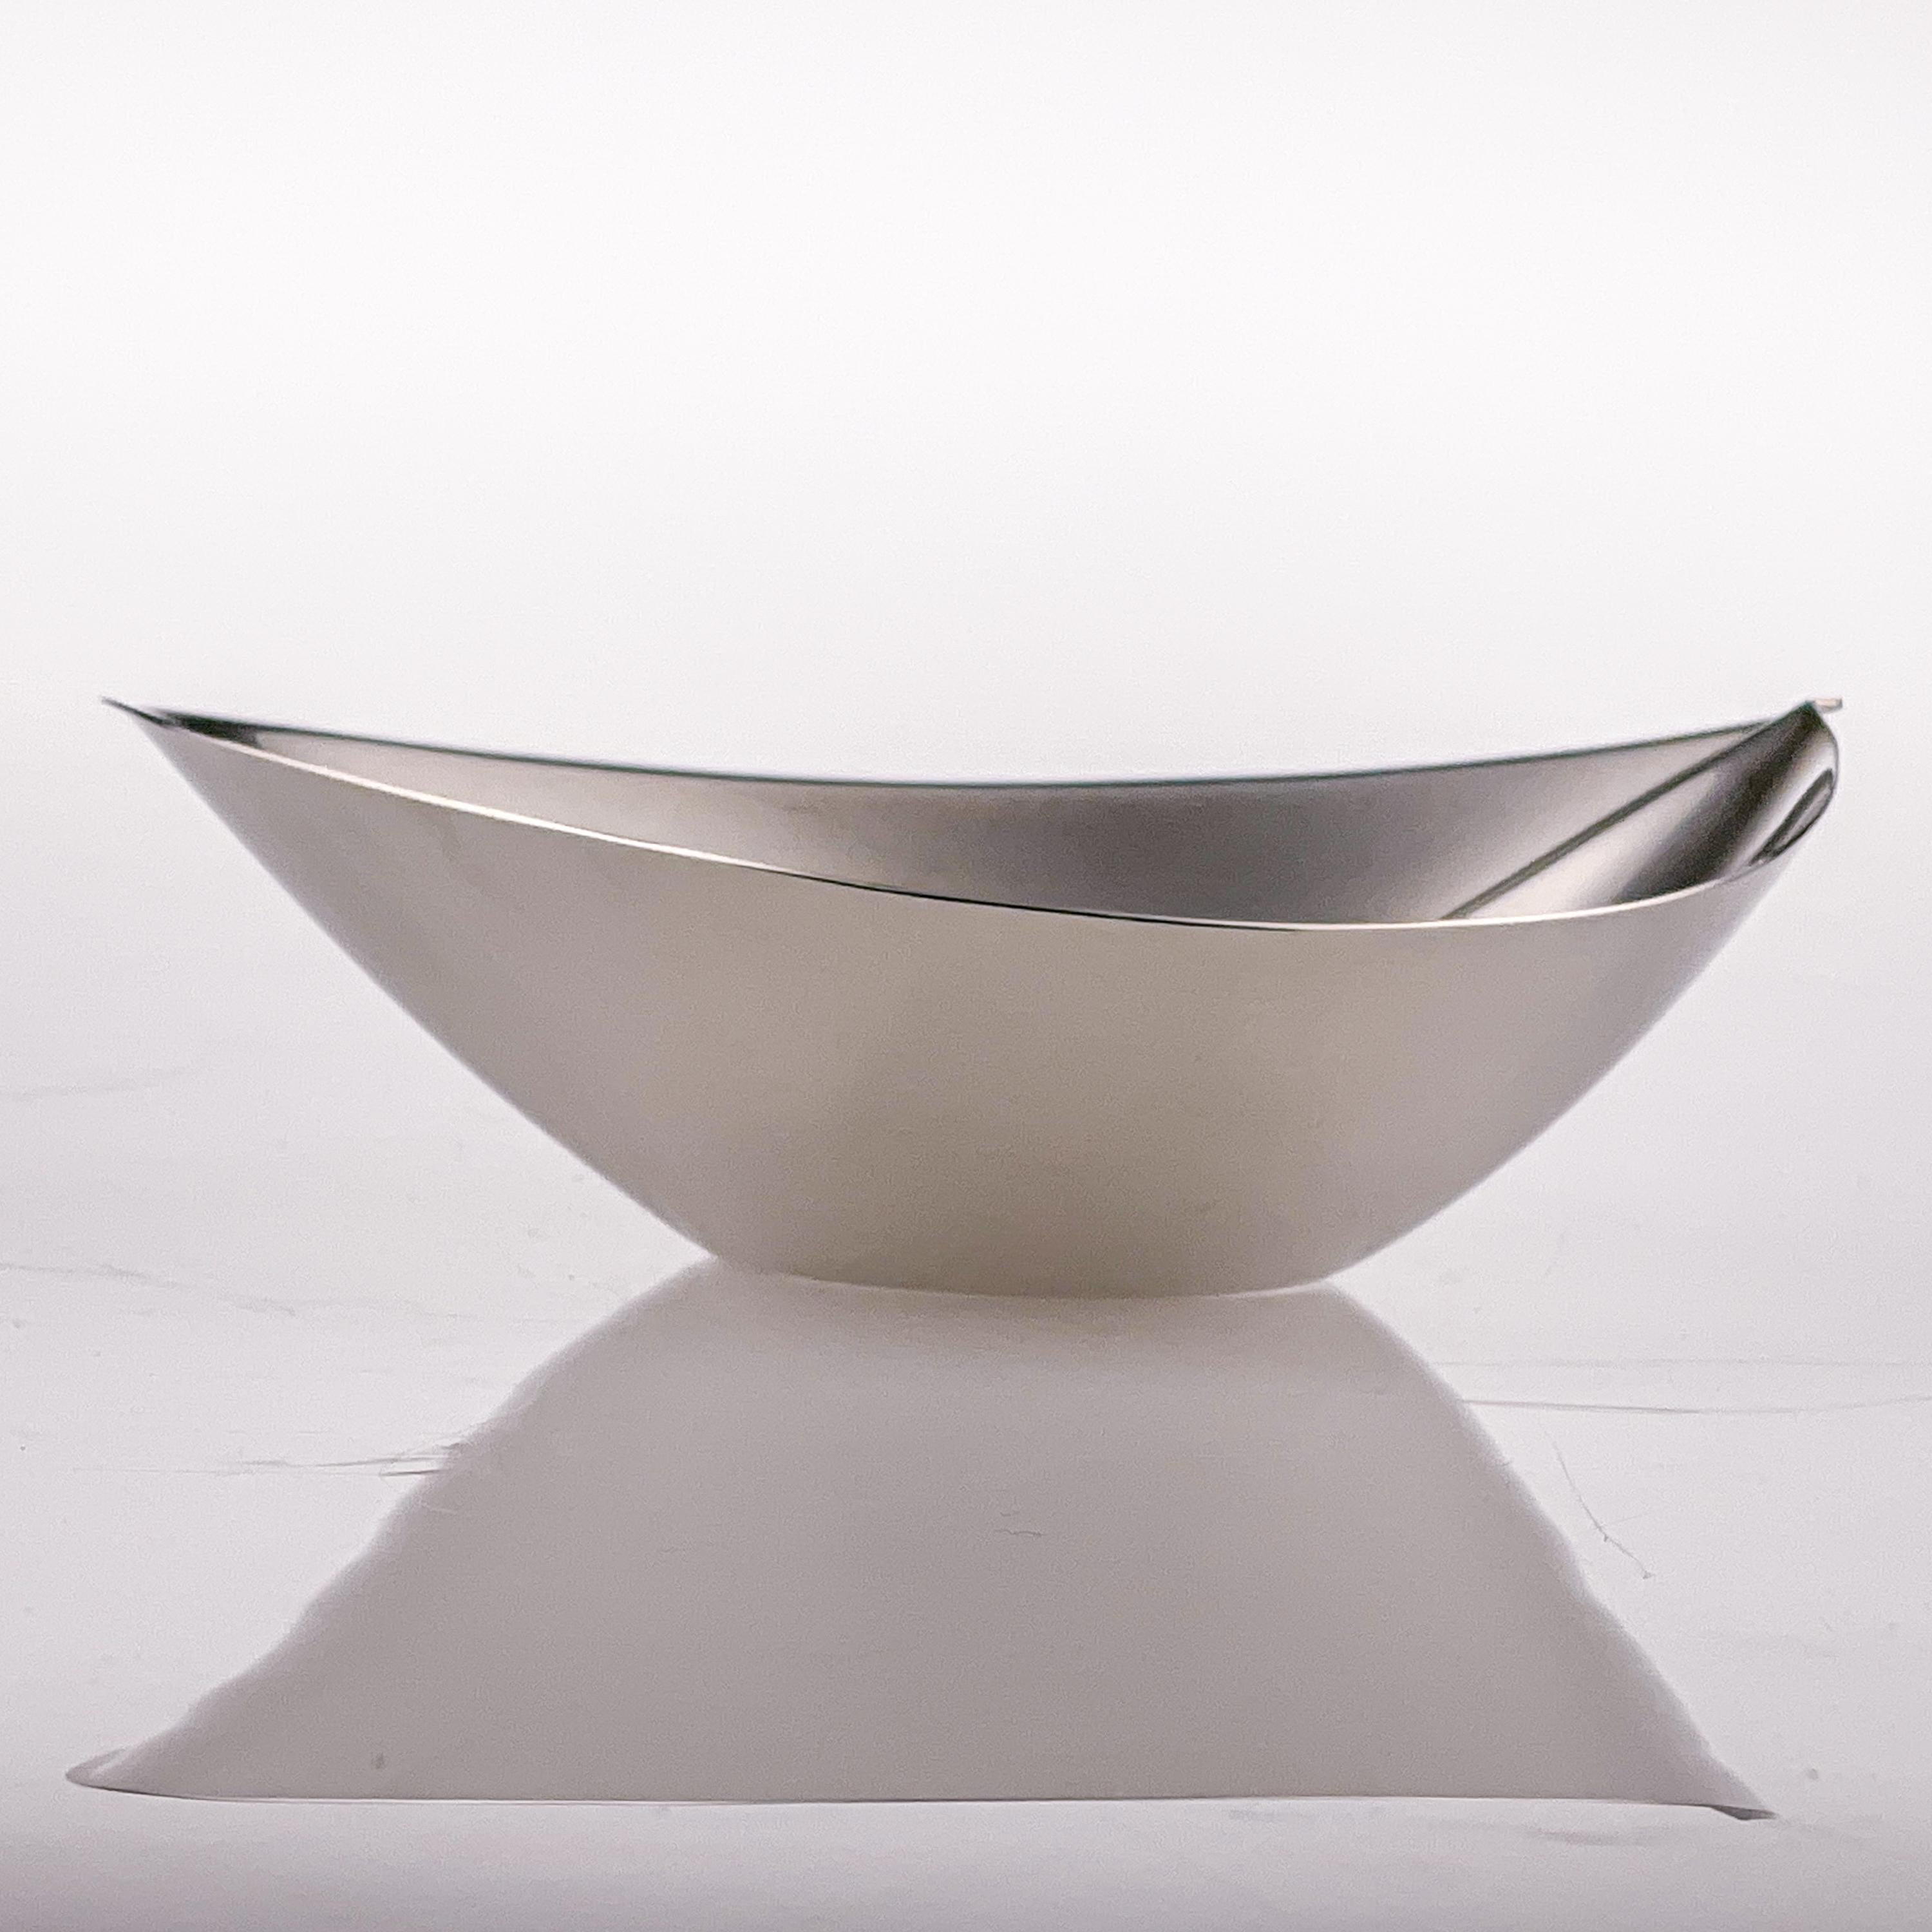 Tapio Wirkkala - A silver bowl, Model TW 118 - Kultakeskus, Finland 1965

Artist
Tapio Wirkkala (1915 Hanko, Finland - 1985 Helsinki, Finland) A giant of Finnish design, Wirkkala was an artist of great diversity for whom no material was alien and